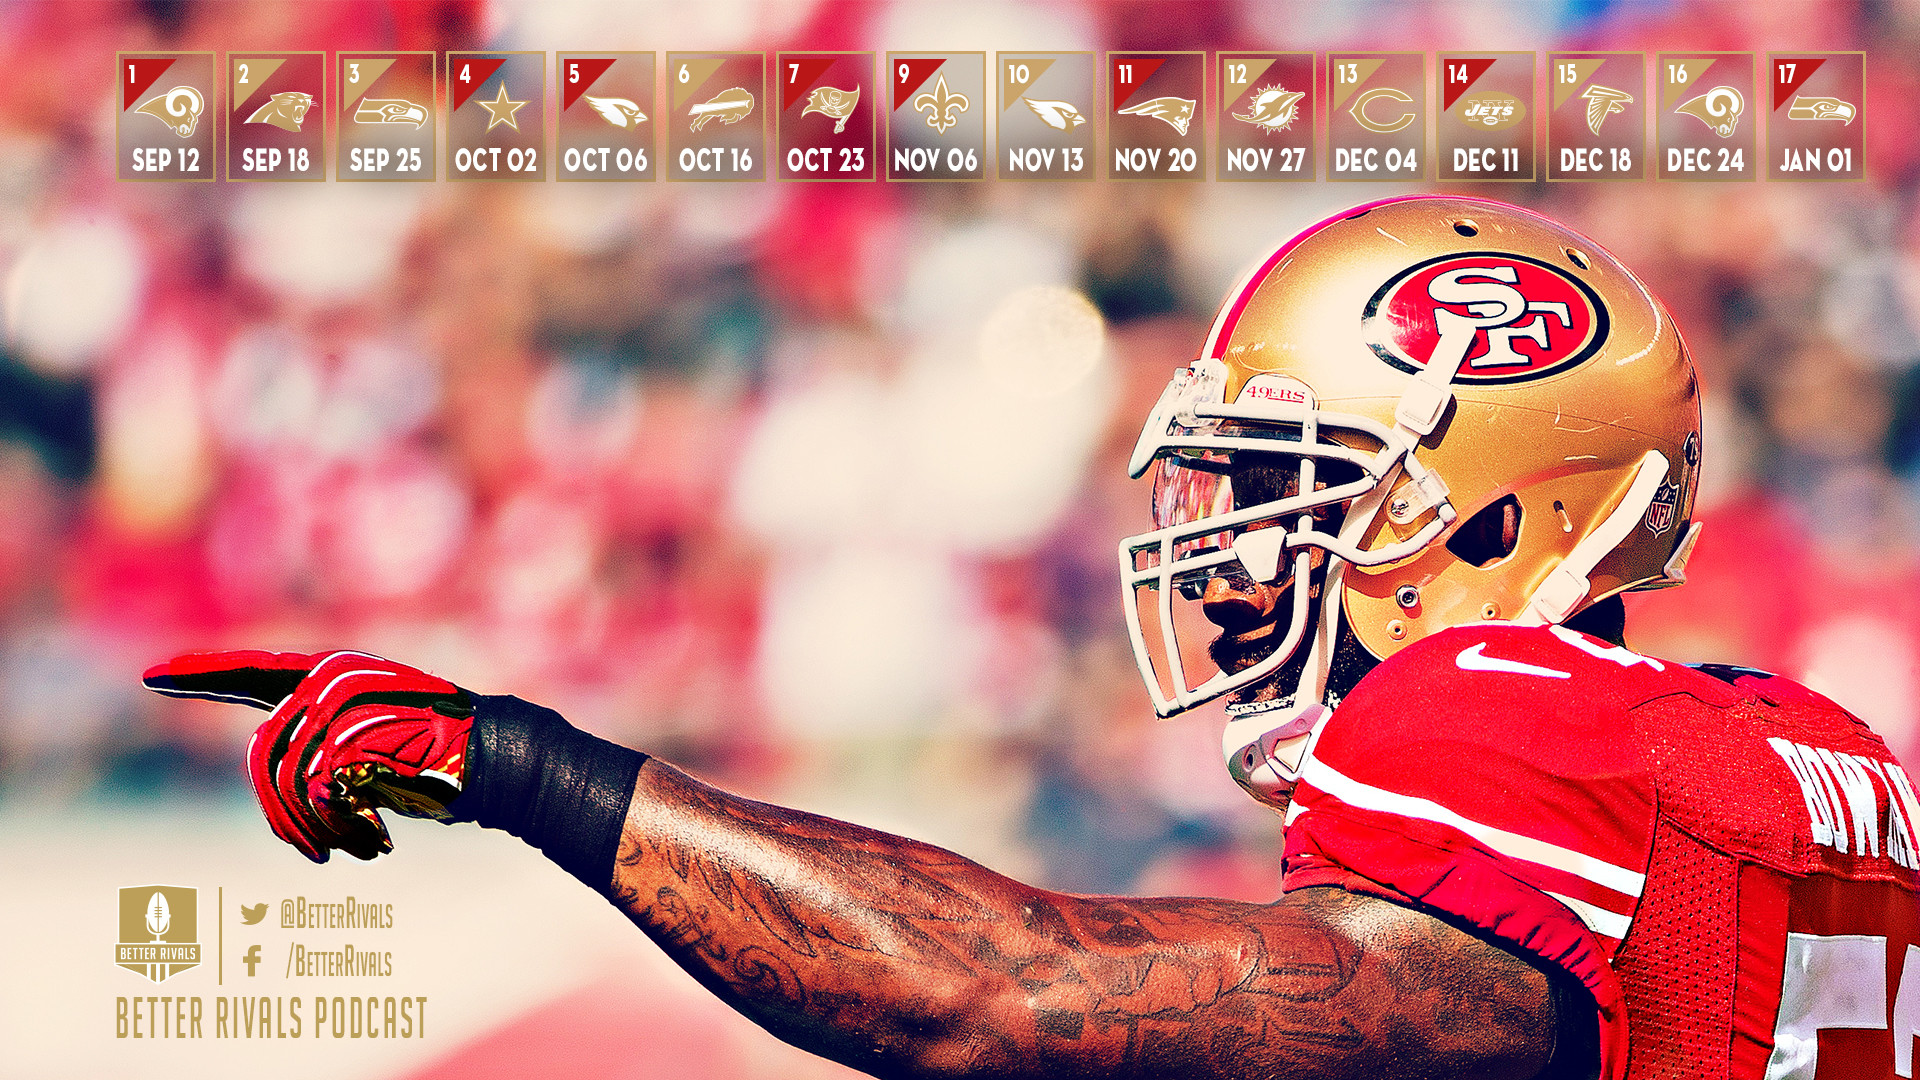 1920x1080 New 49ers Wallpapers for Desktop and Mobile